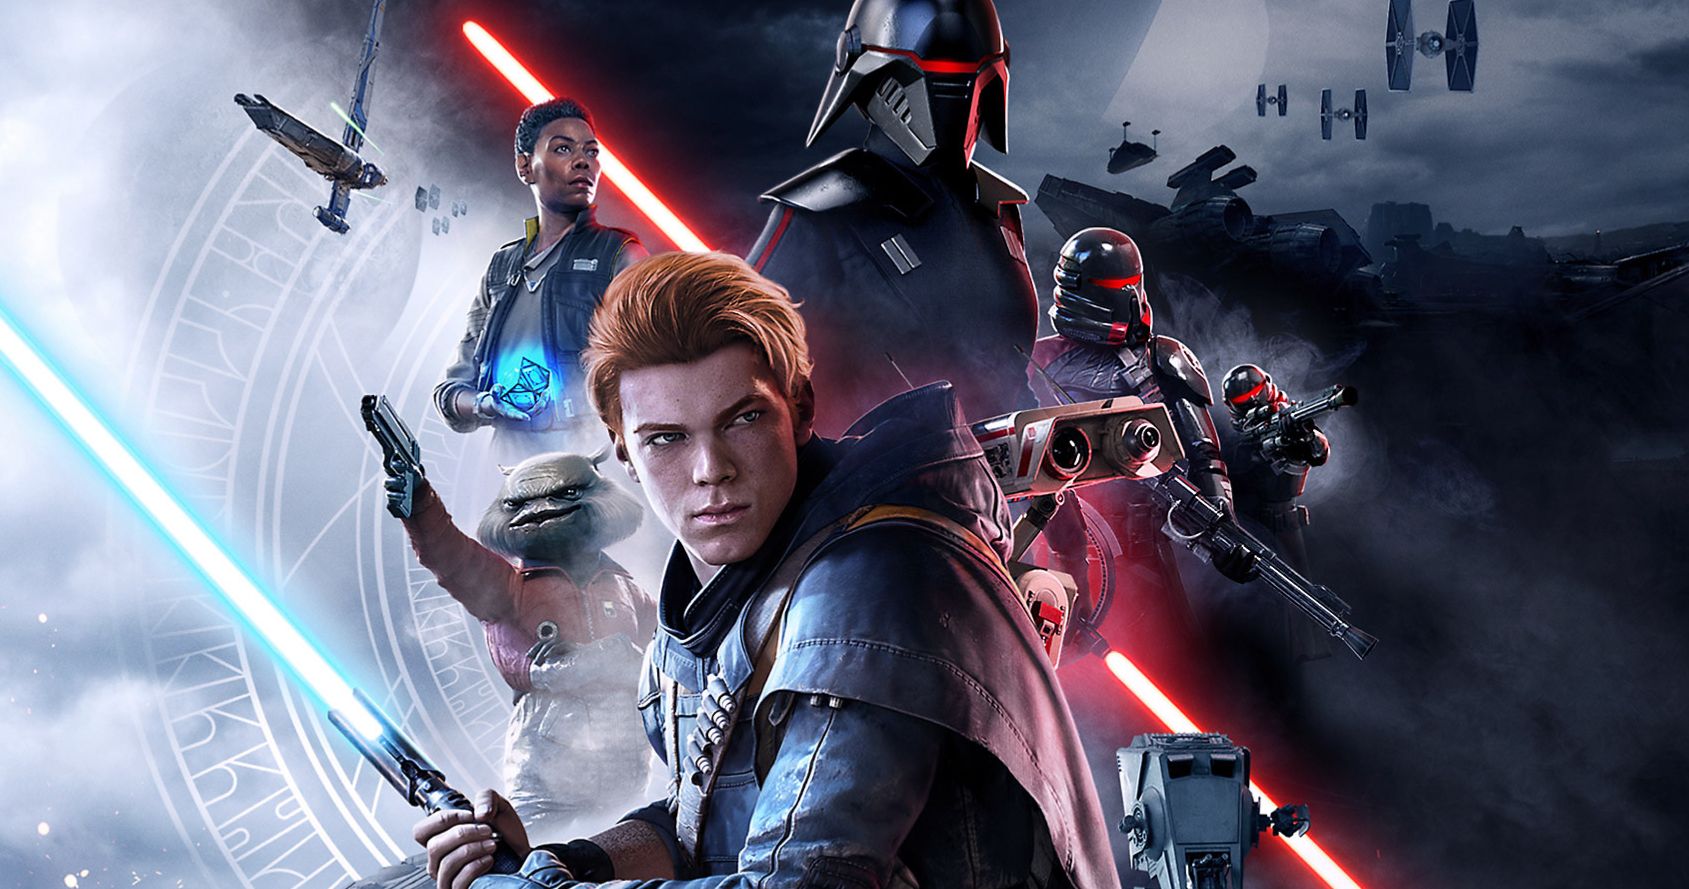 Star Wars Jedi: Fallen Order Game Is Getting a Prequel Comic from Marvel